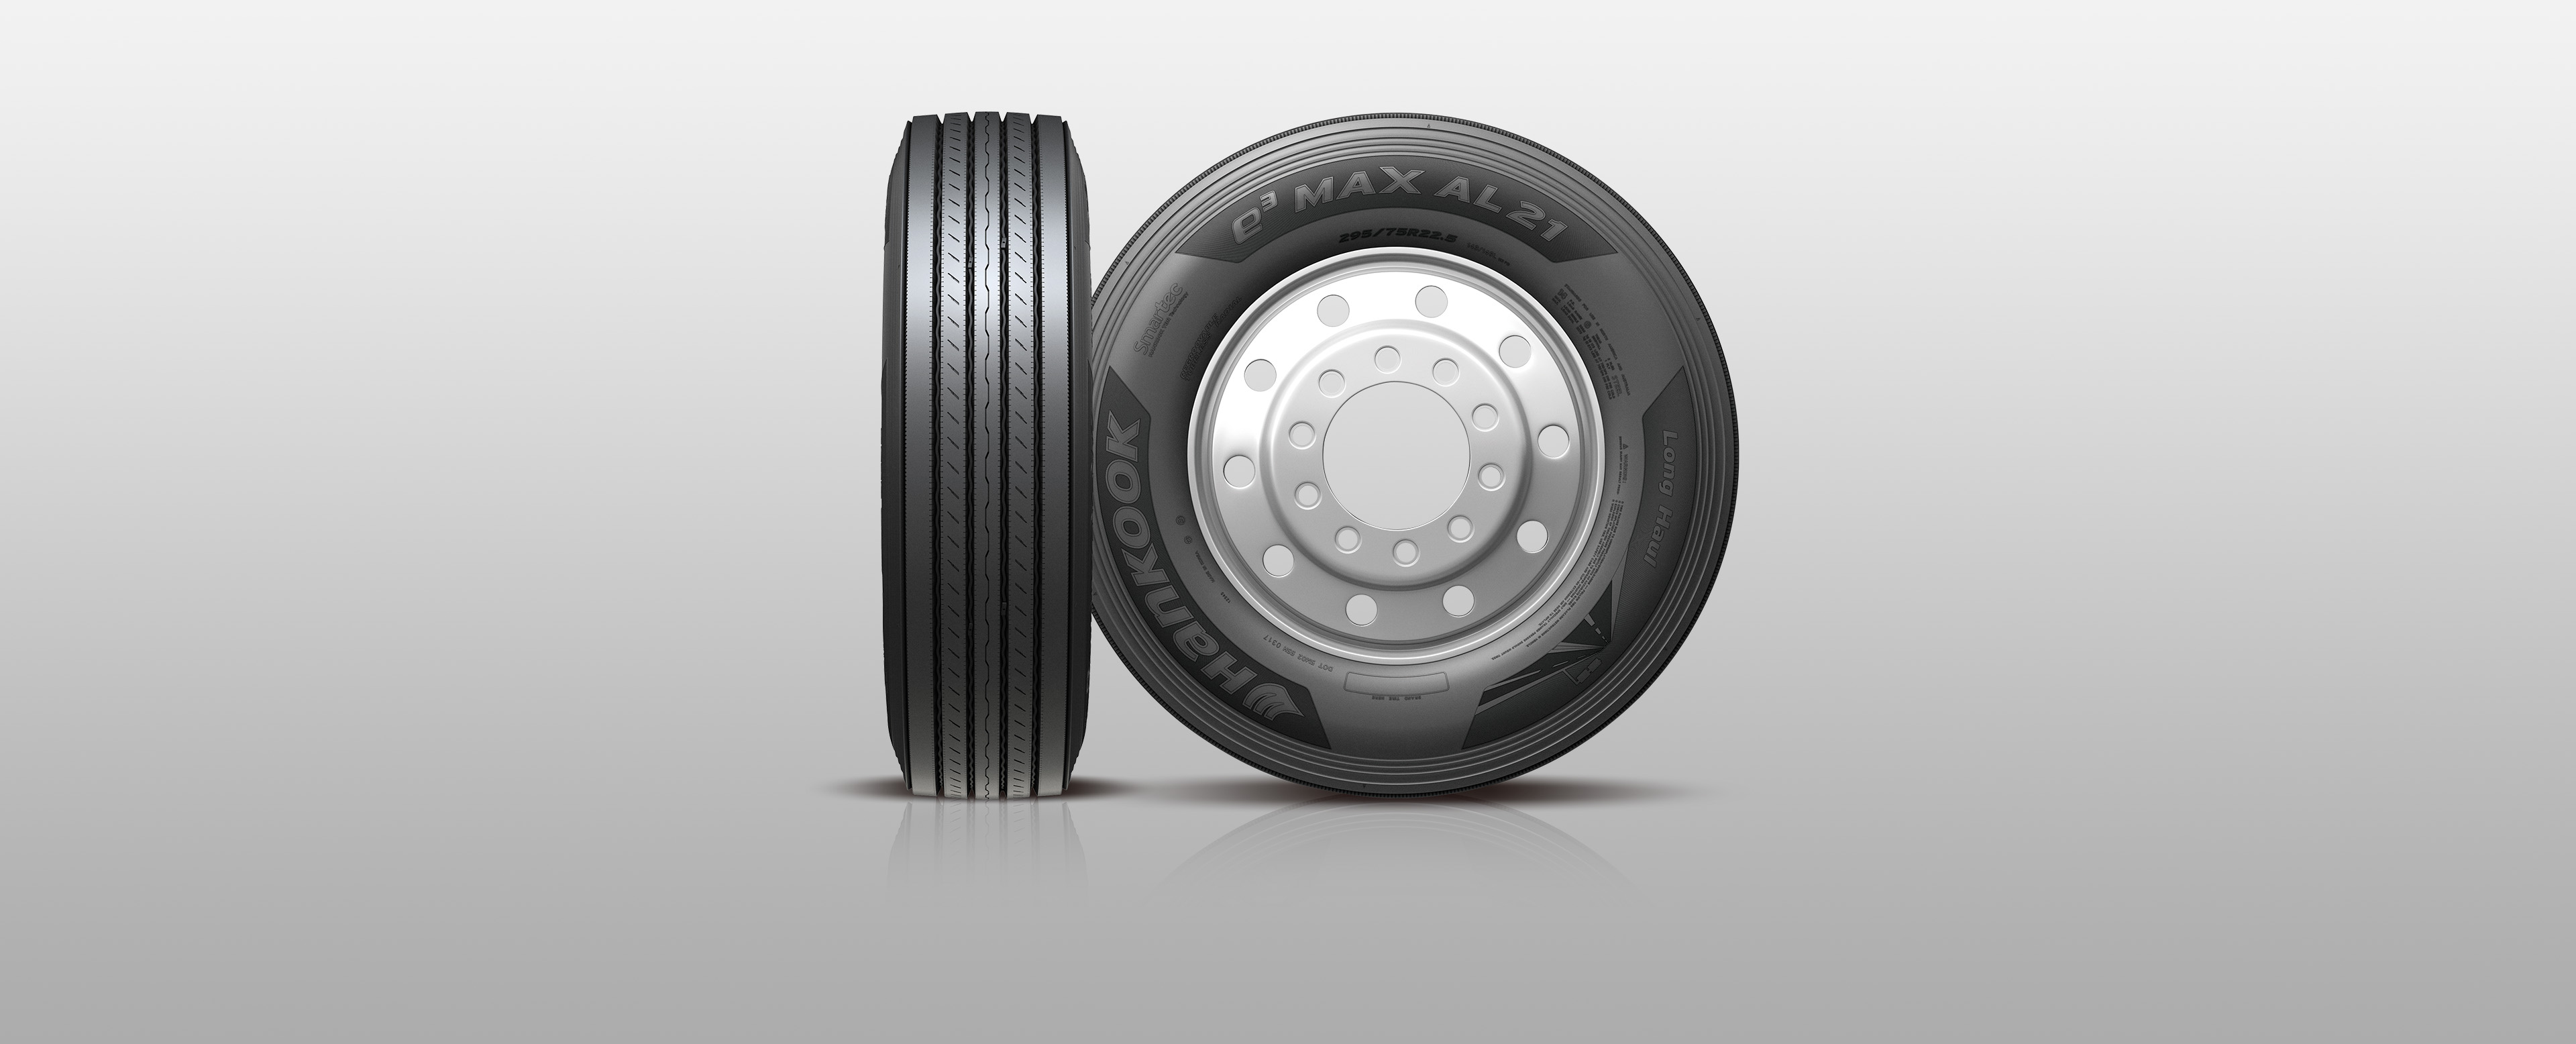 Hankook Tire & Technology-Tires-Smart-Smart e3 max-AL21-Long haul steer tire with long mileage and fuel efficiency